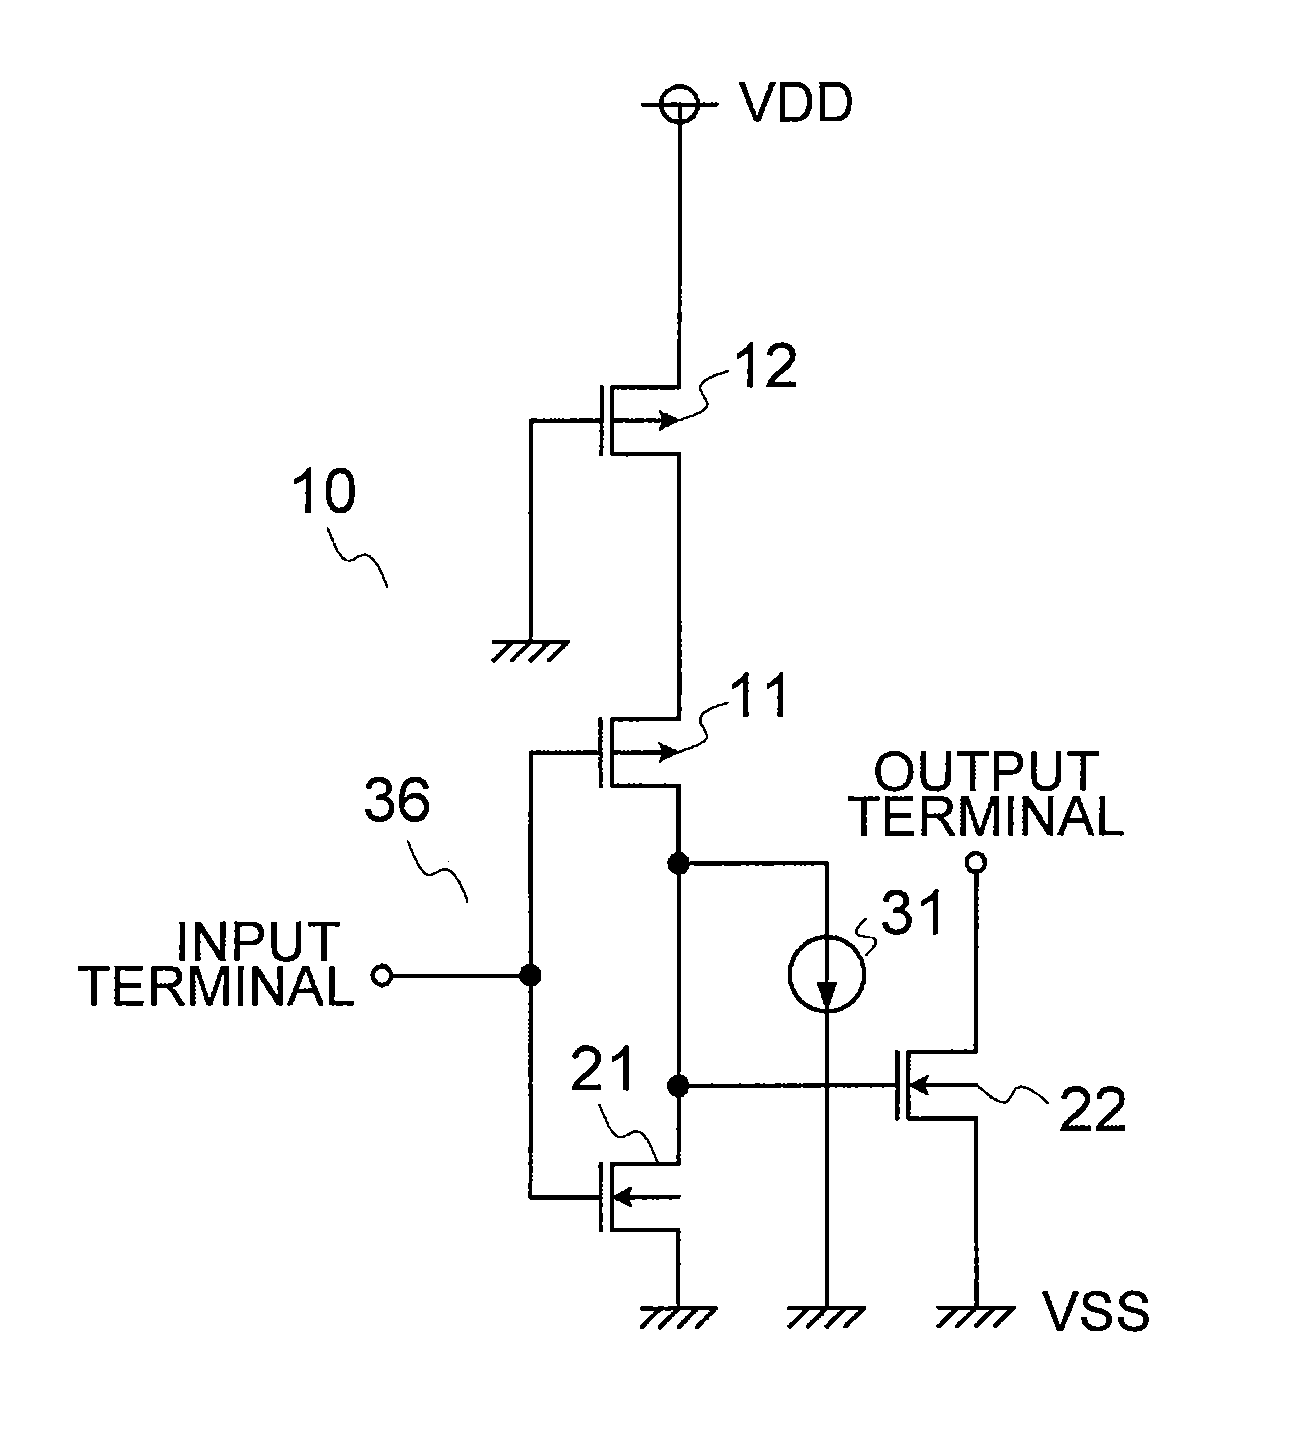 Output circuit, temperature switch IC, and battery pack